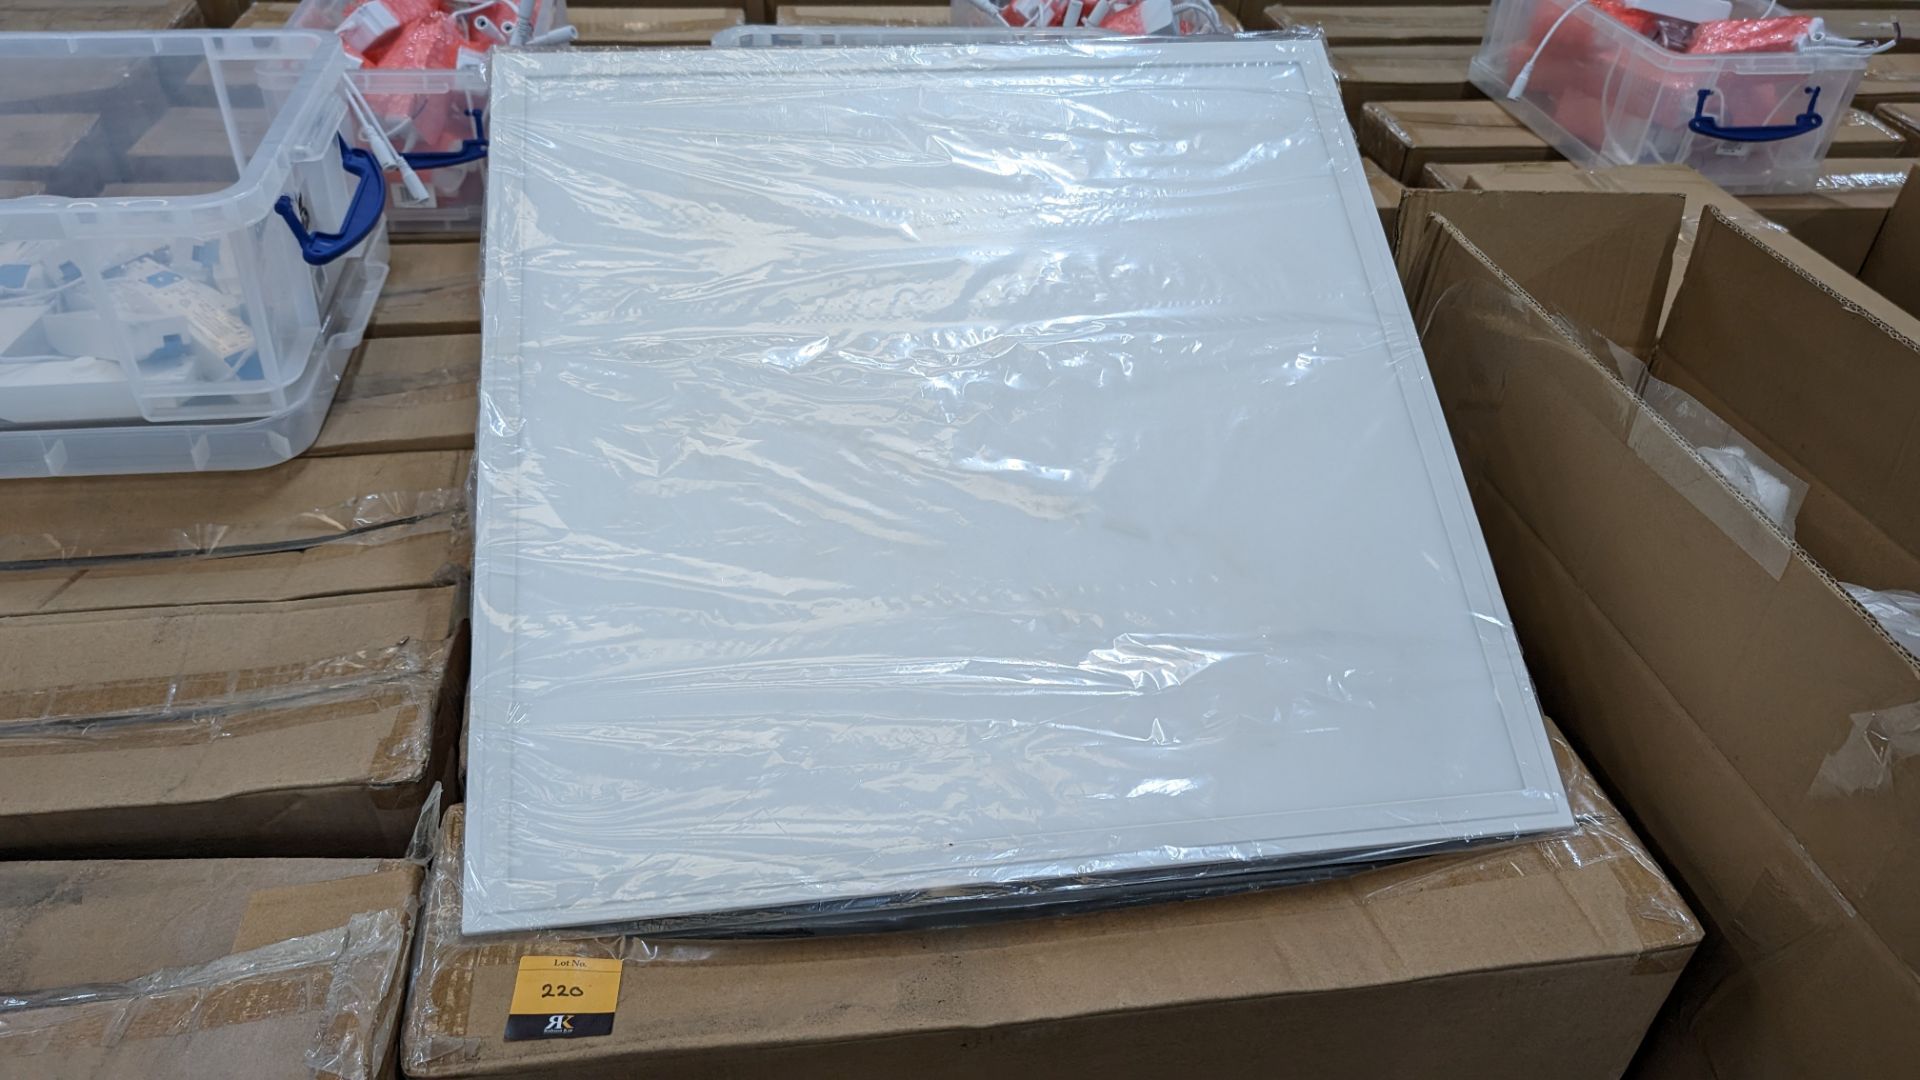 20 off 595mm x 595mm 32/36w 5500k 4320 lumens cold white LED lighting panels. This lot comprises 5 - Image 3 of 7